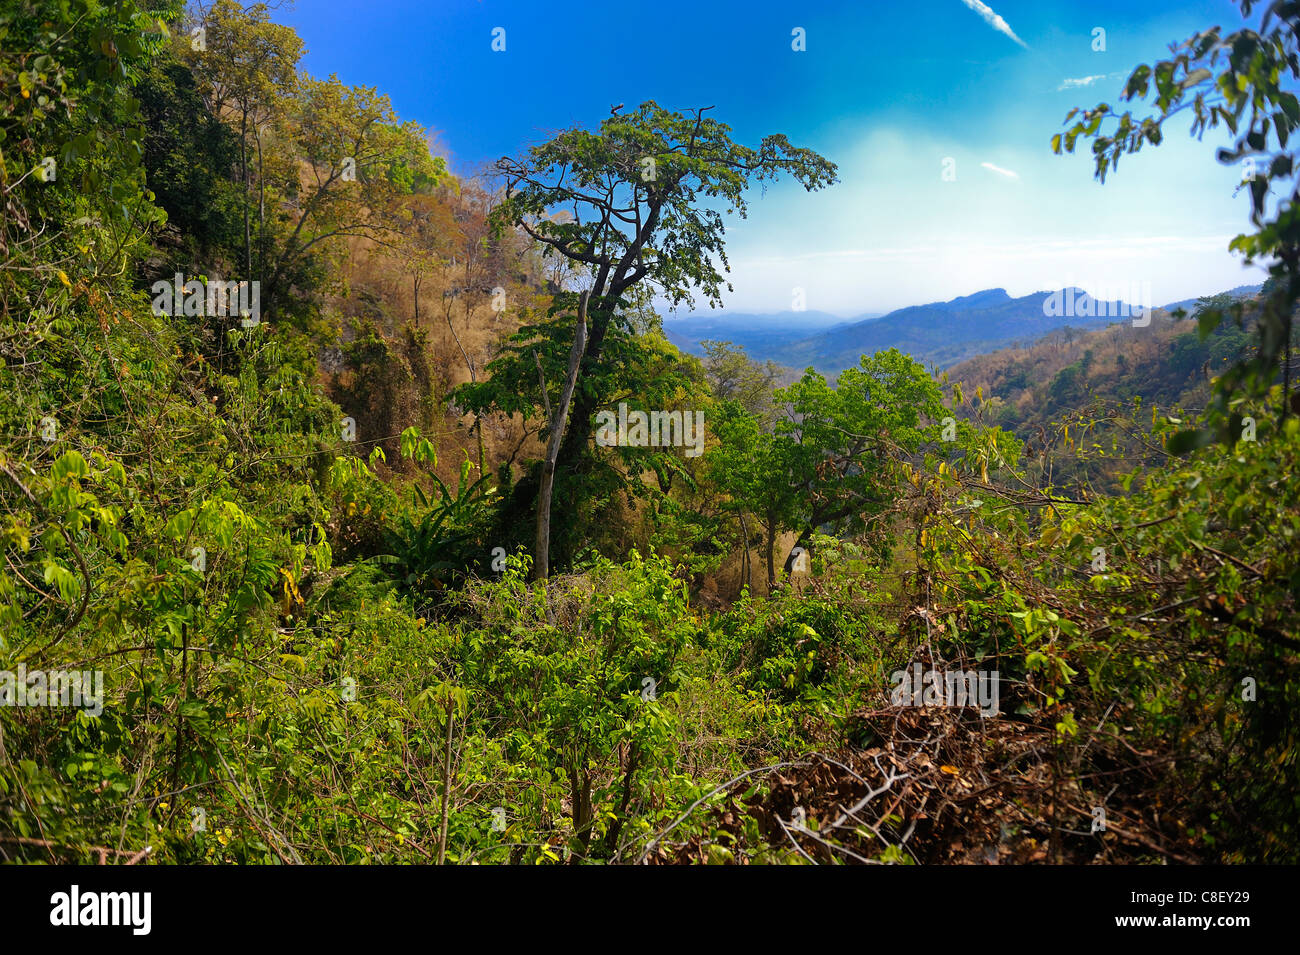 View, overlook, Chaolem Rattanakosin, National Park, Thailand, Asia, forest, trees, Stock Photo